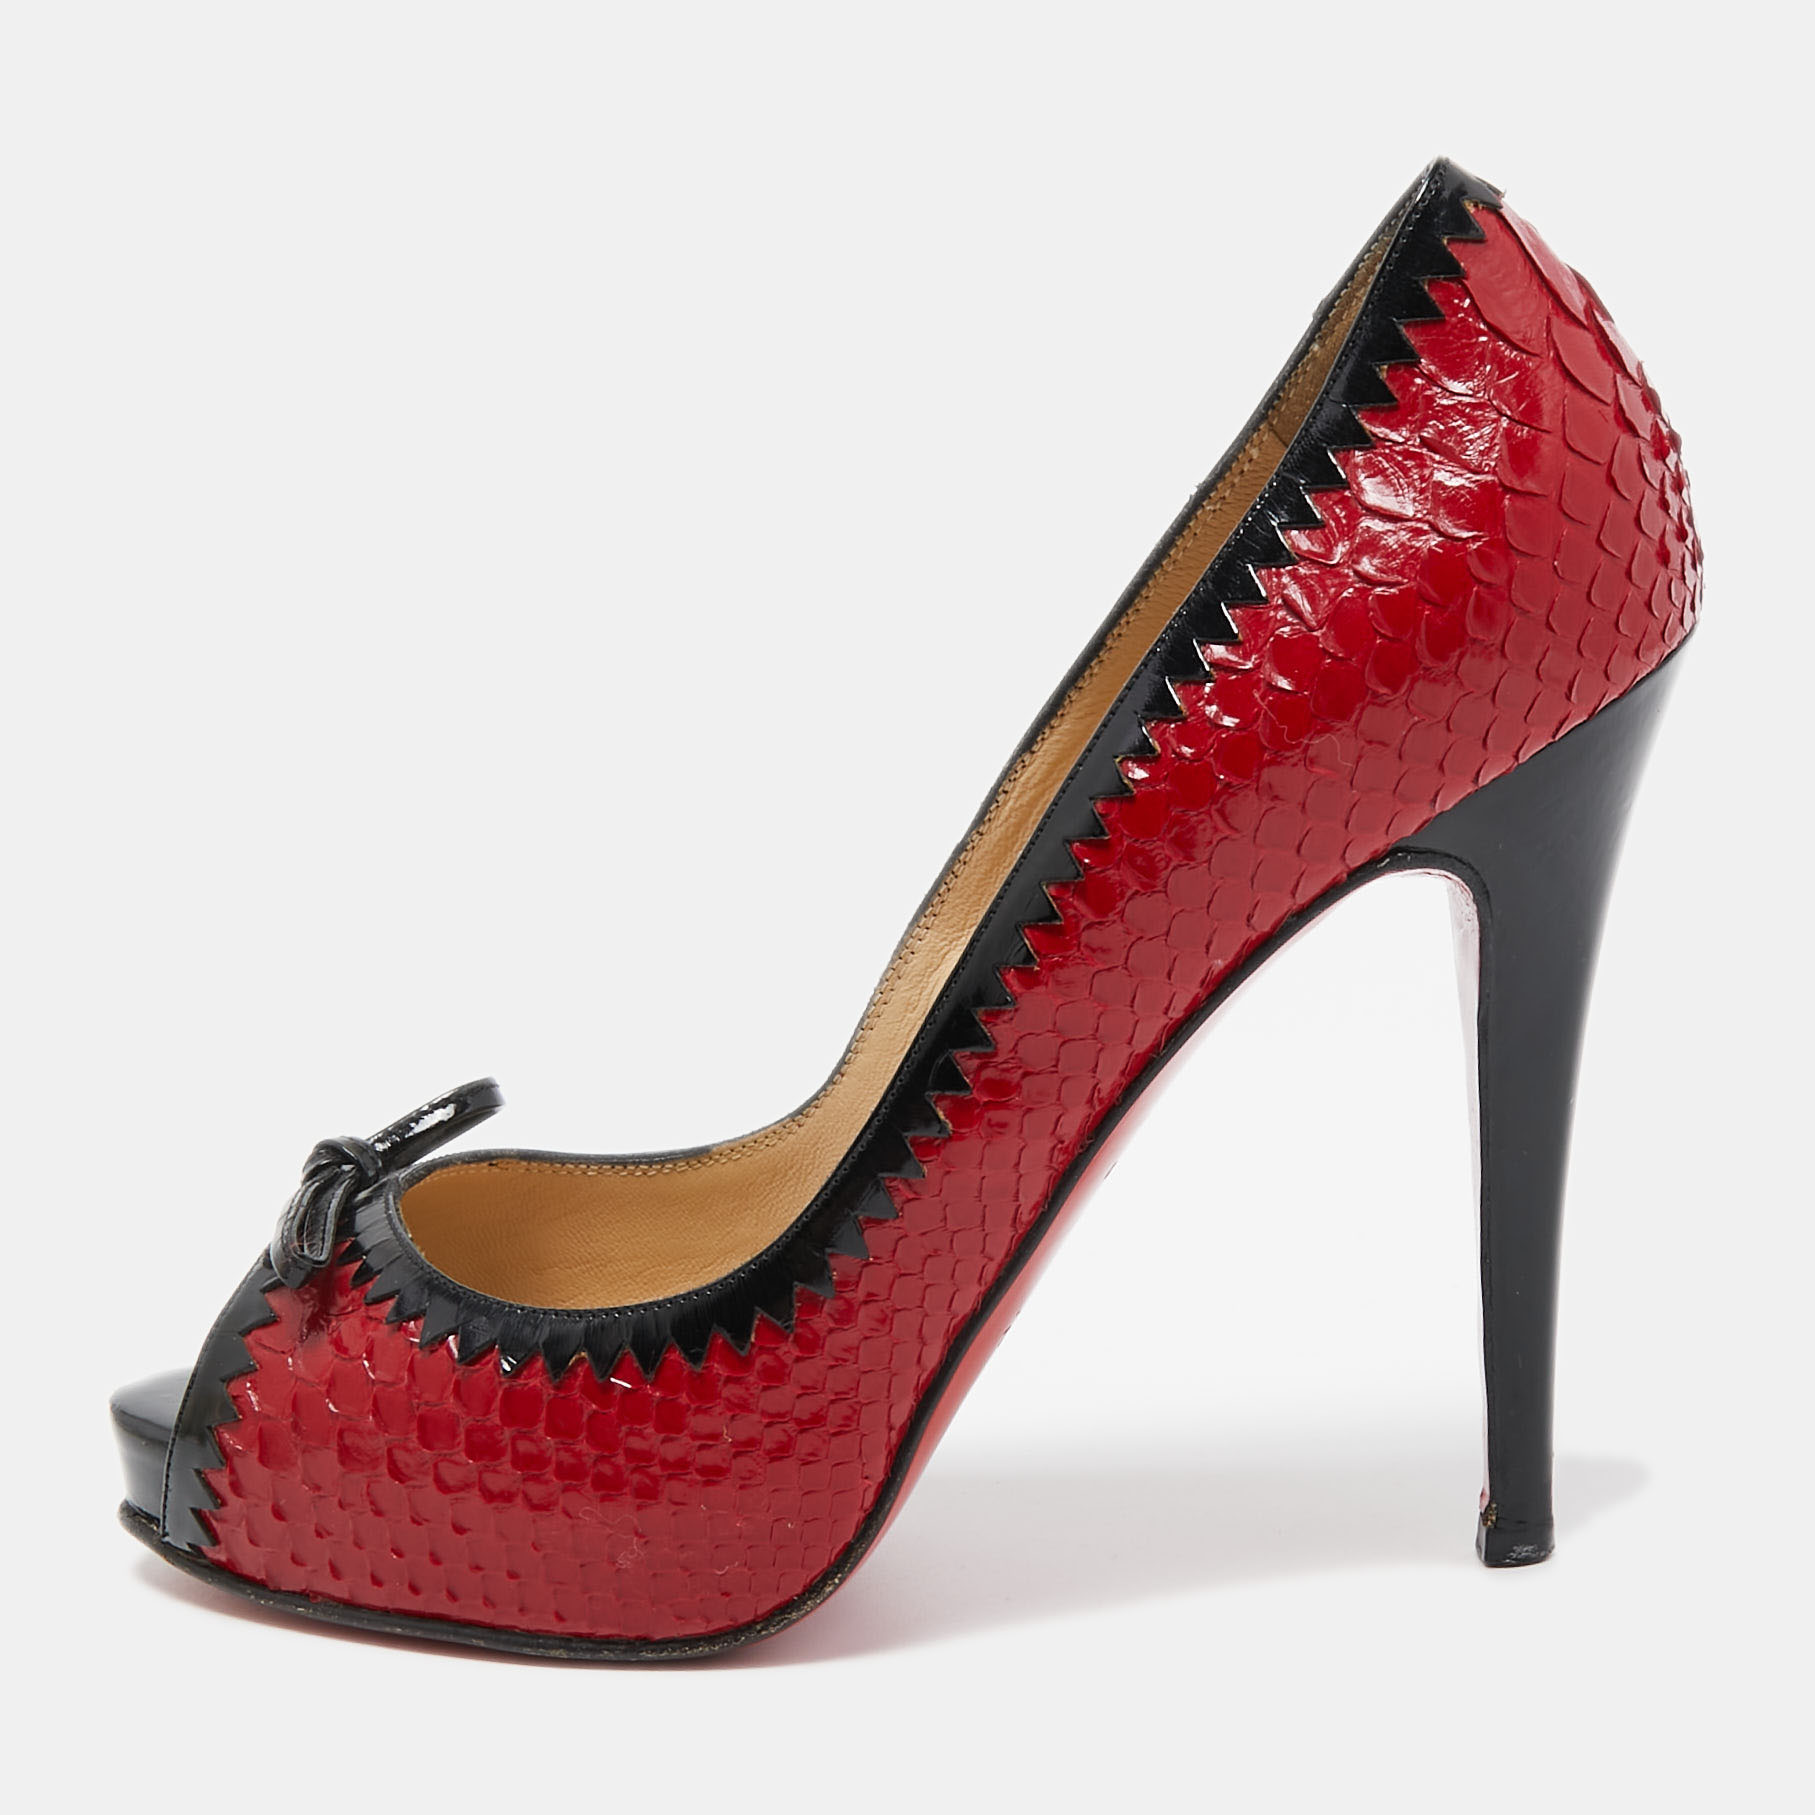 Pre-owned Christian Louboutin Red/black Python Leather Peep Toe Platform Pumps Size 37